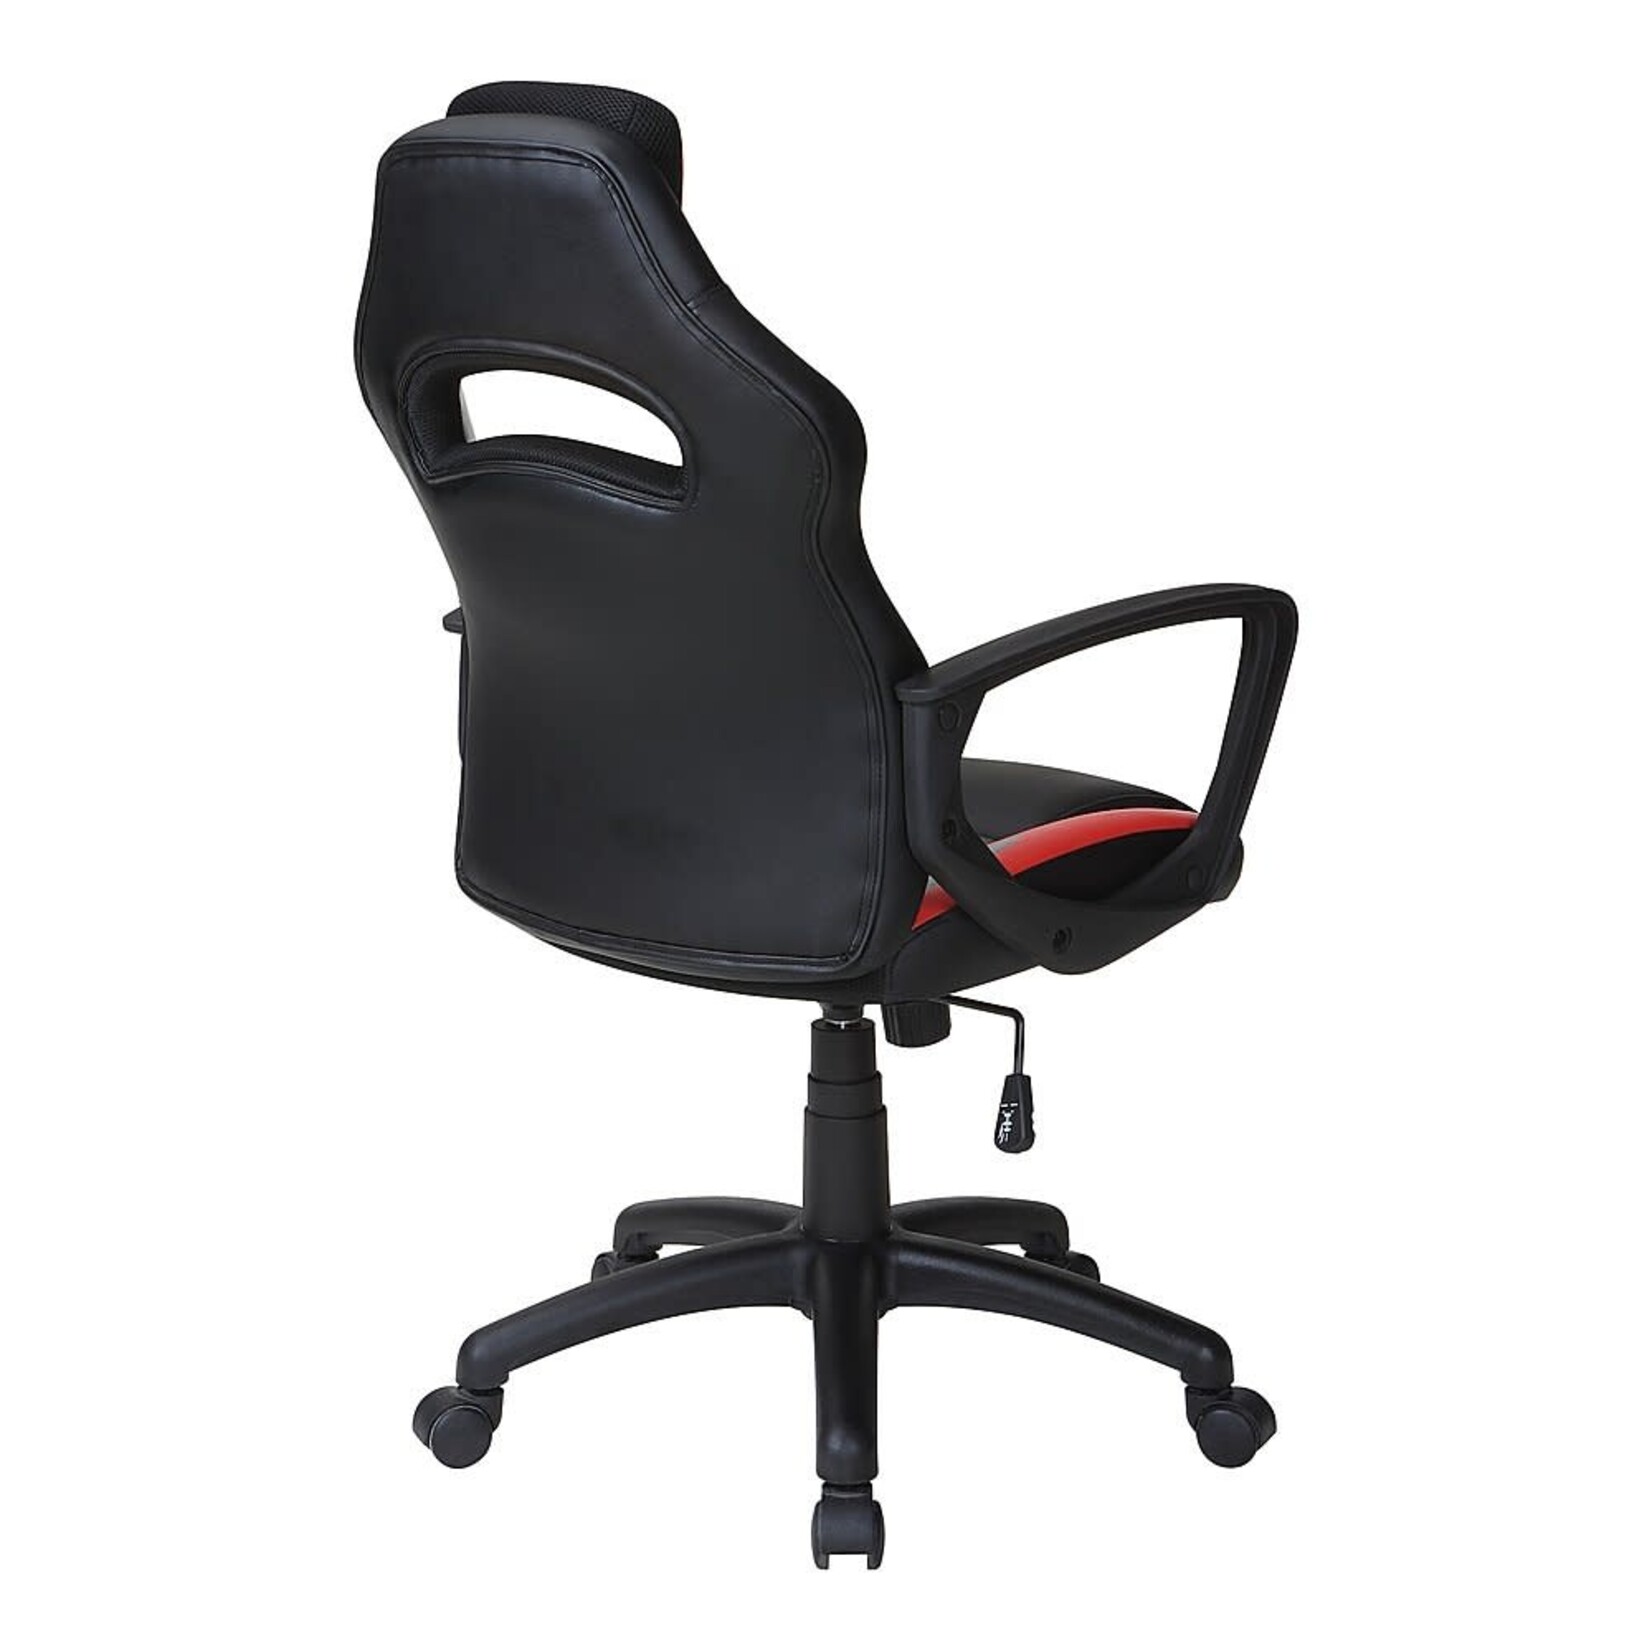 Designlab OSP Home Furnishings - Influx Gaming Chair - Red